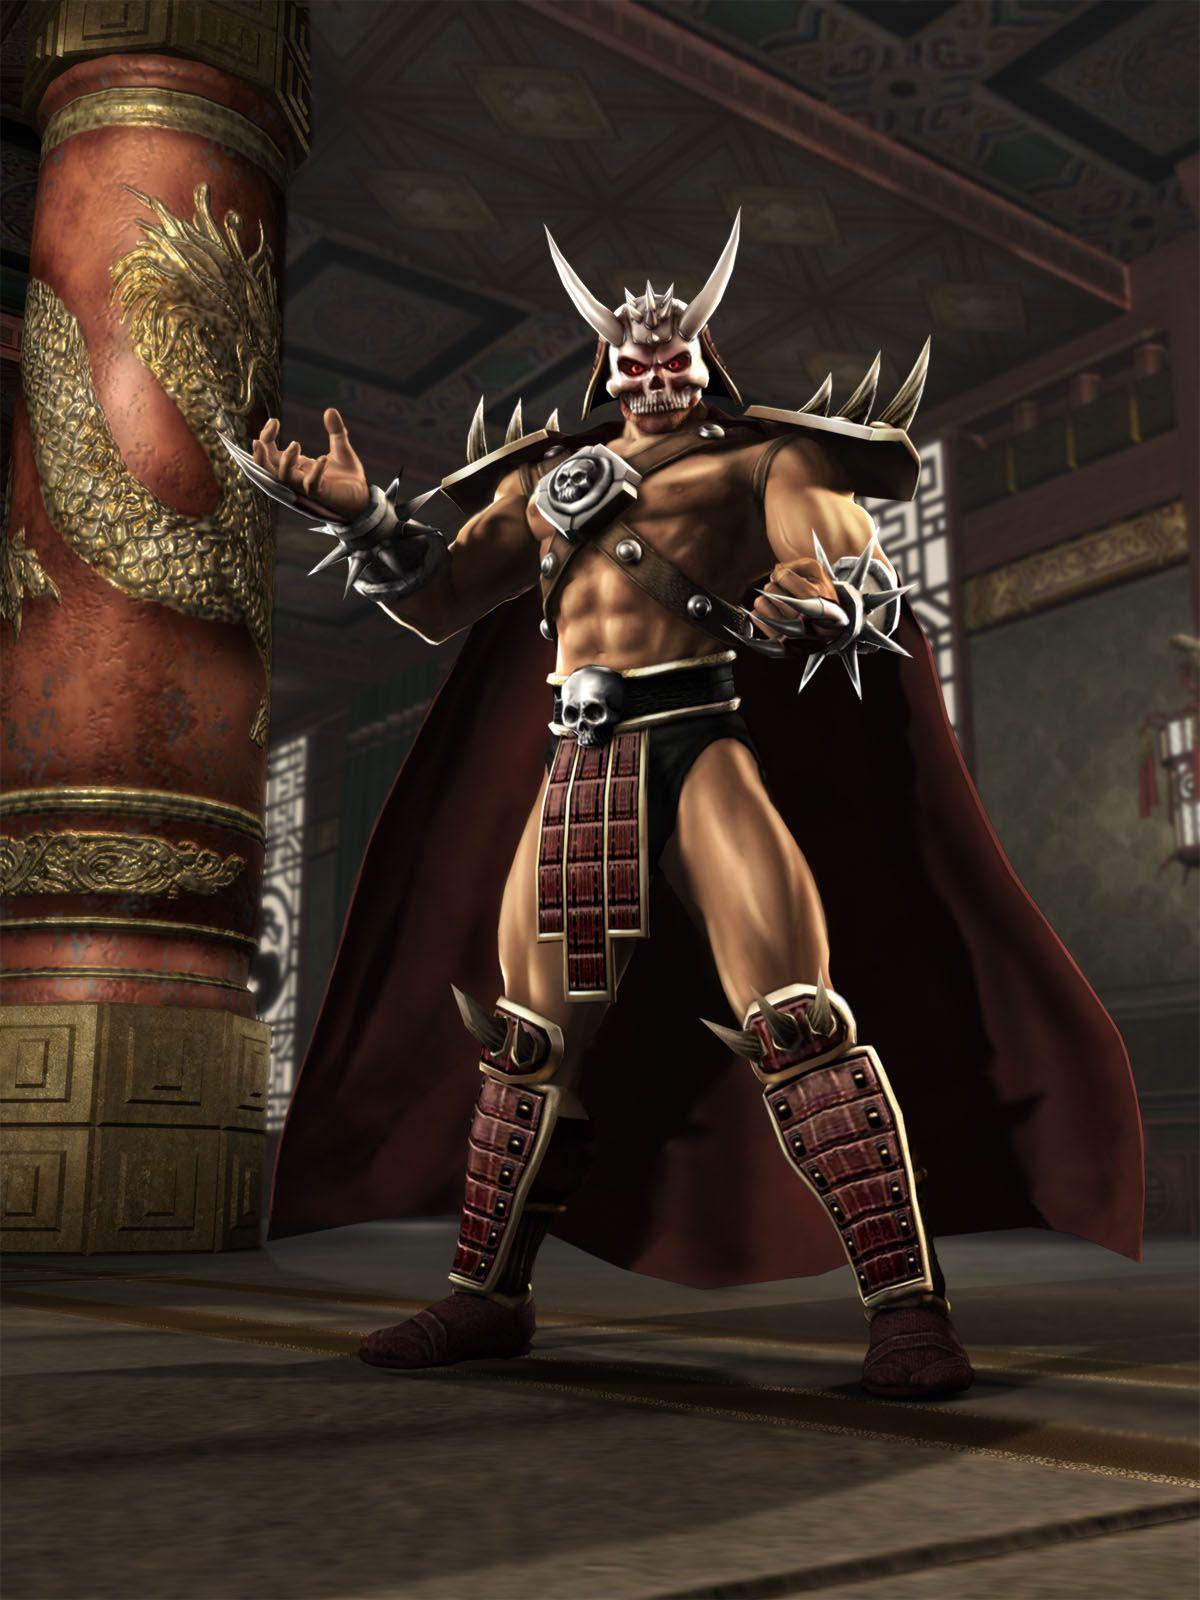 Shao Kahn from Mortal Kombat, Game Art, Cosplays and more